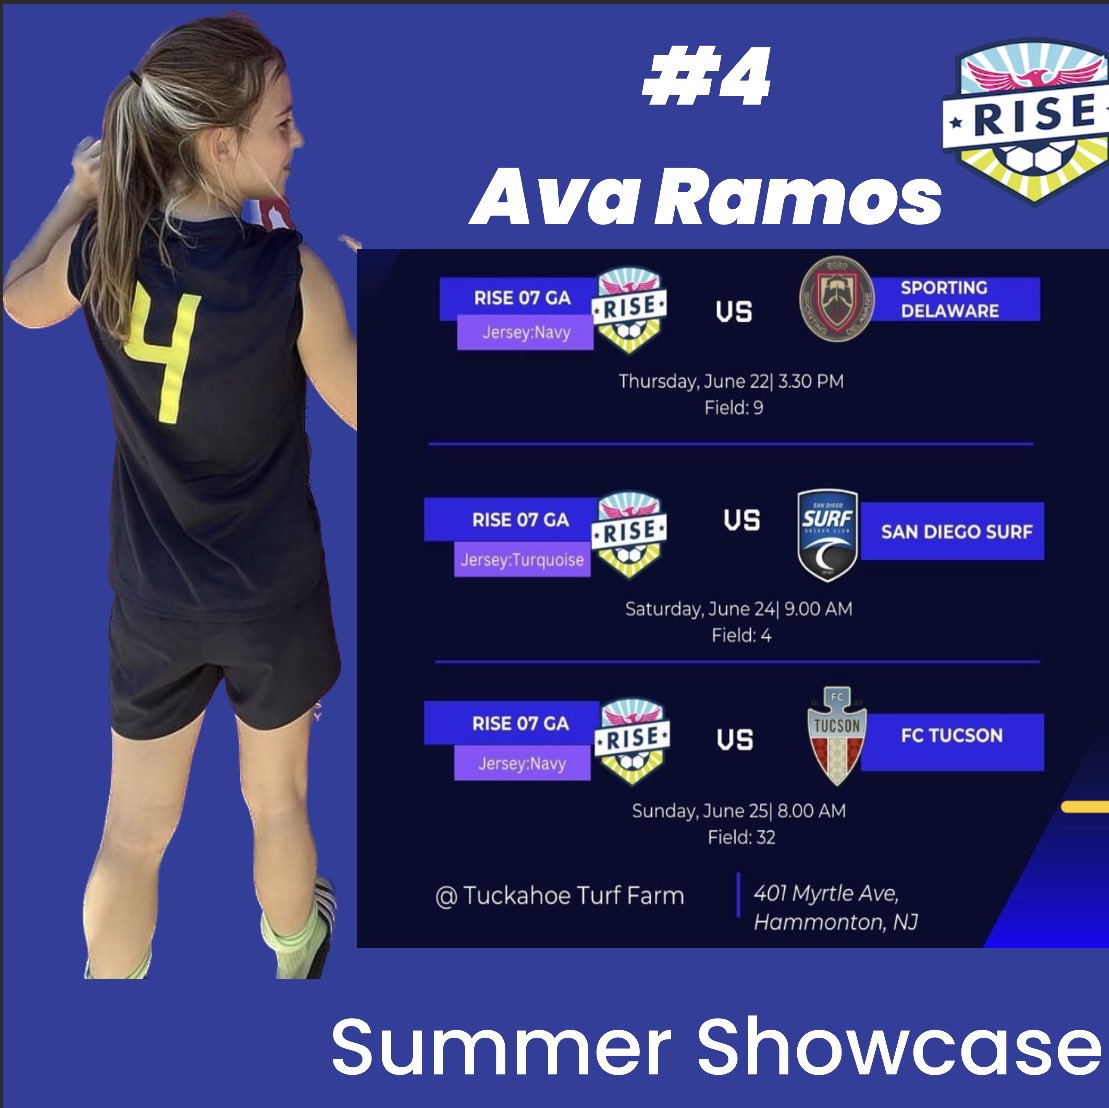 So excited for our summer showcase coming up!!! @Rise07Ga @RiseSoccerClub @dglad1969 @coachkevincross